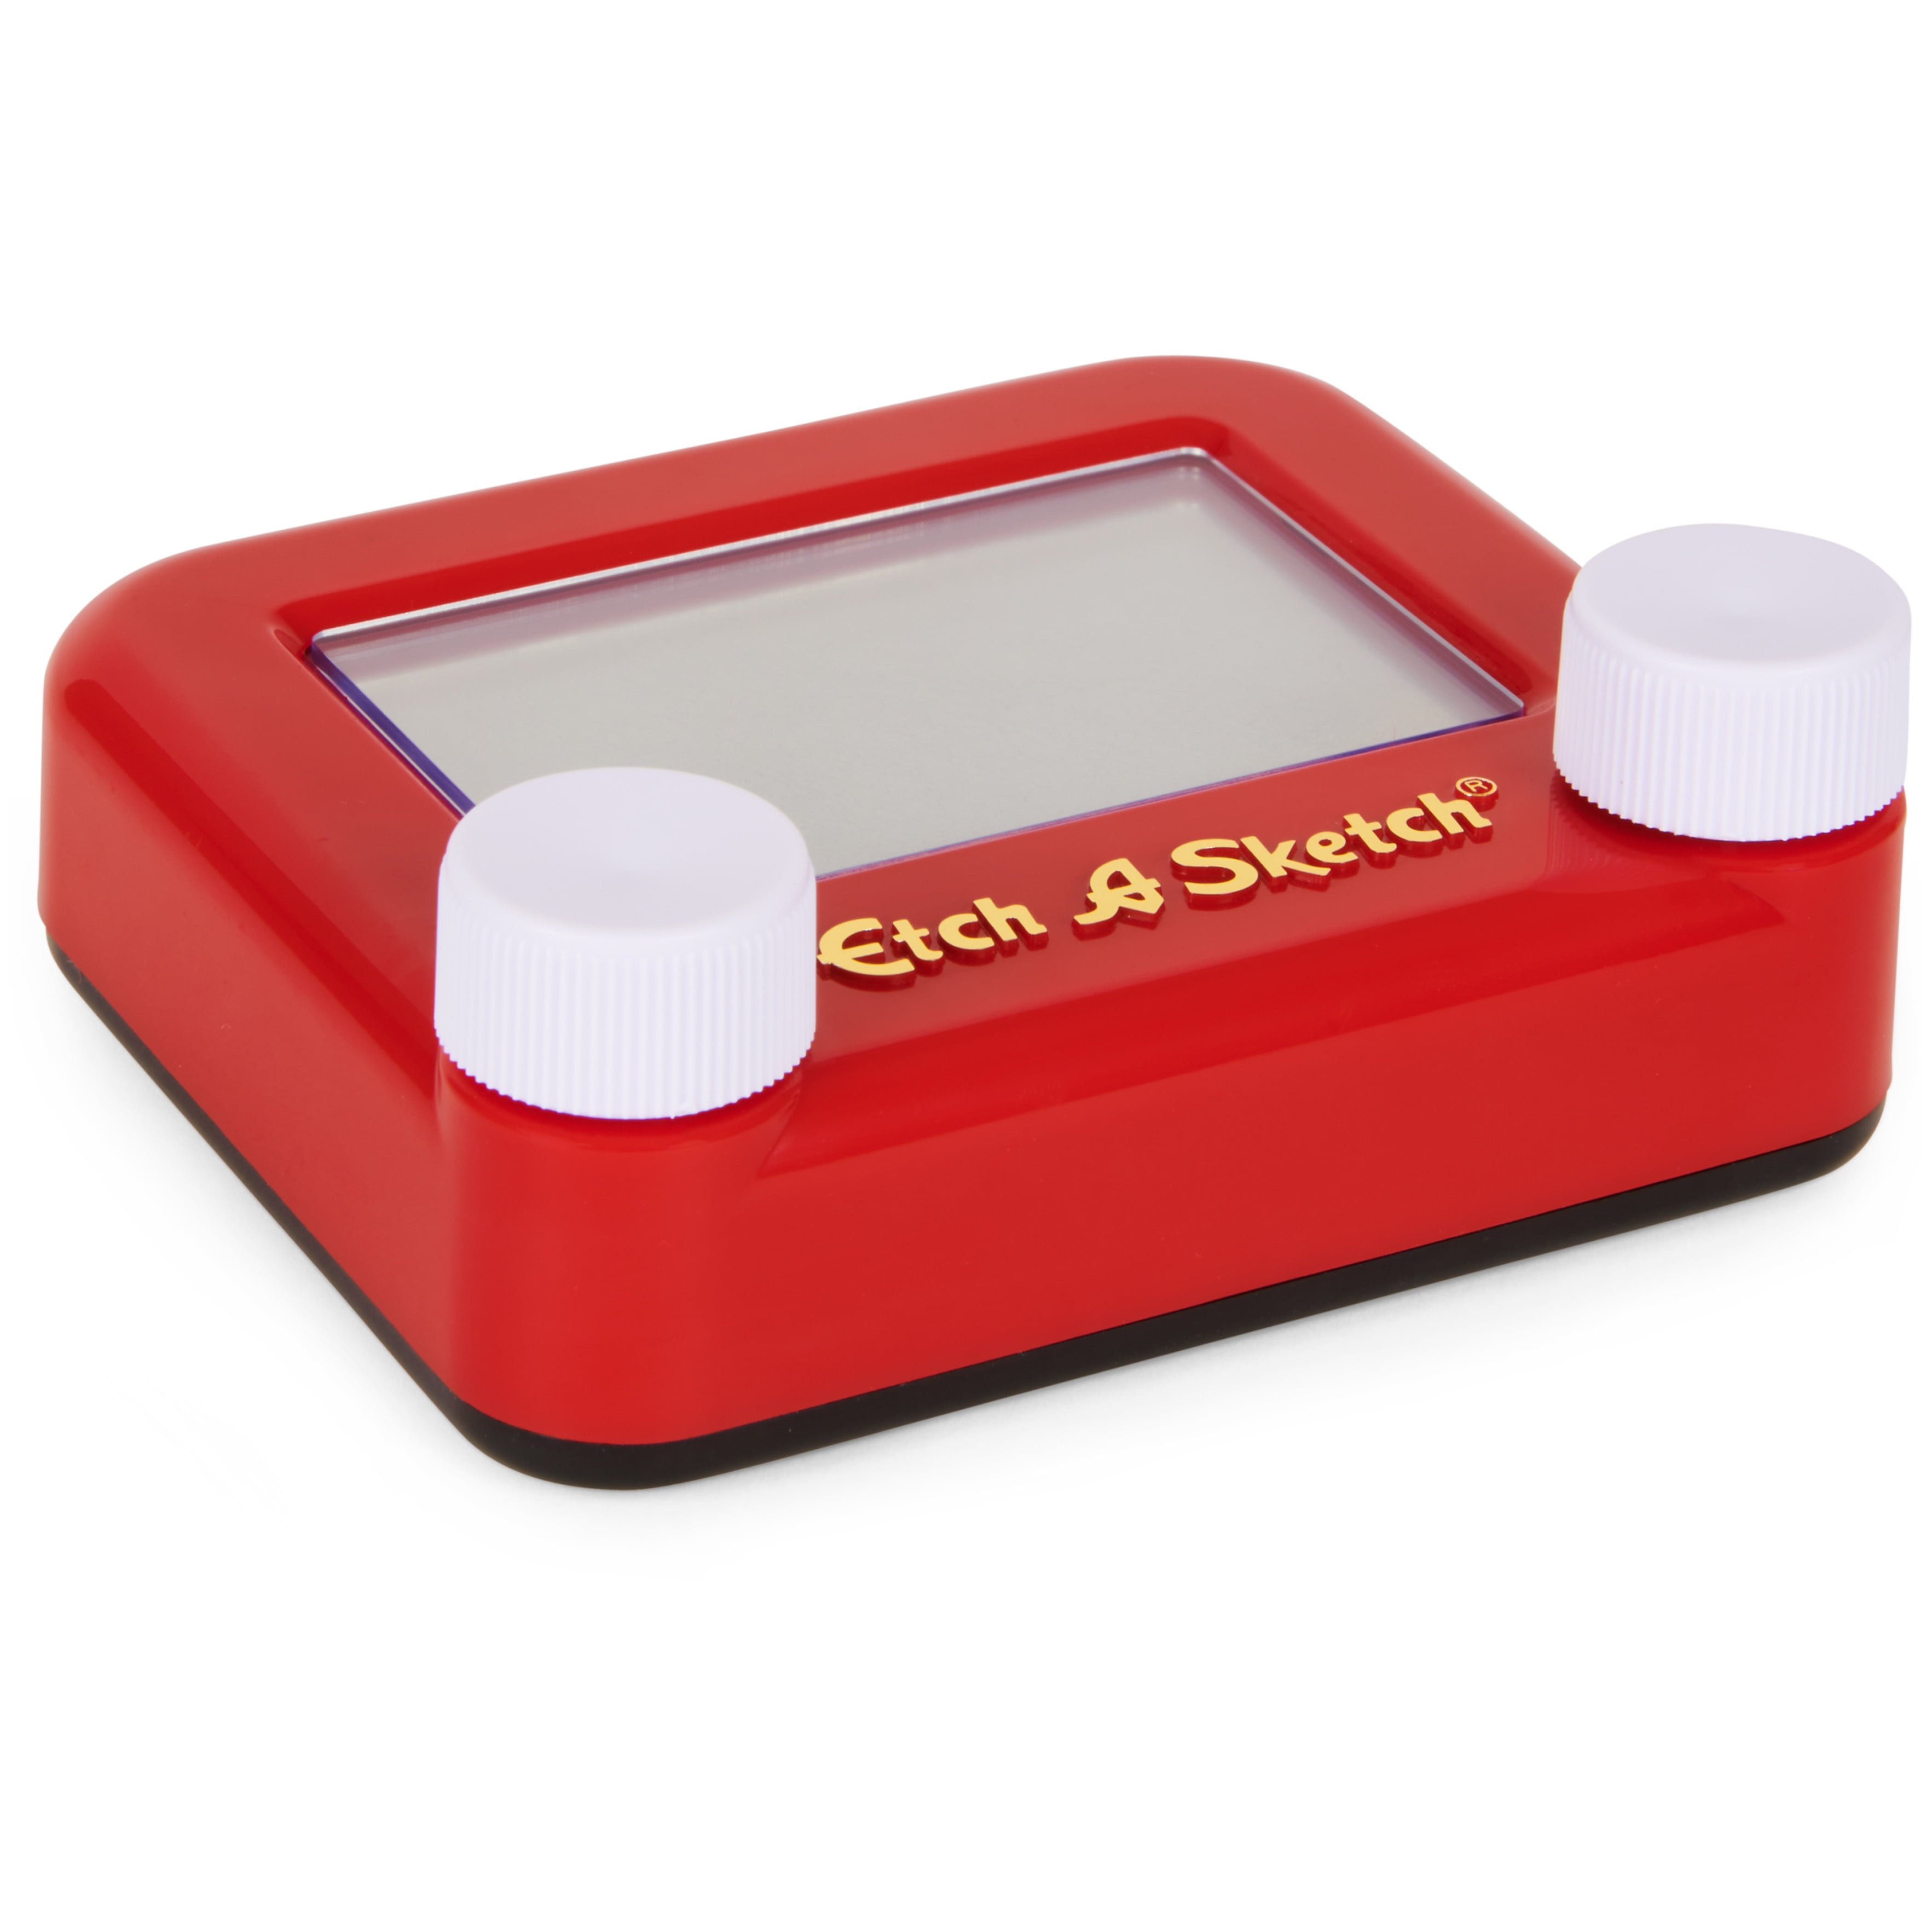 Etch A Sketch Pocket Drawing Pad - Entertainment Earth